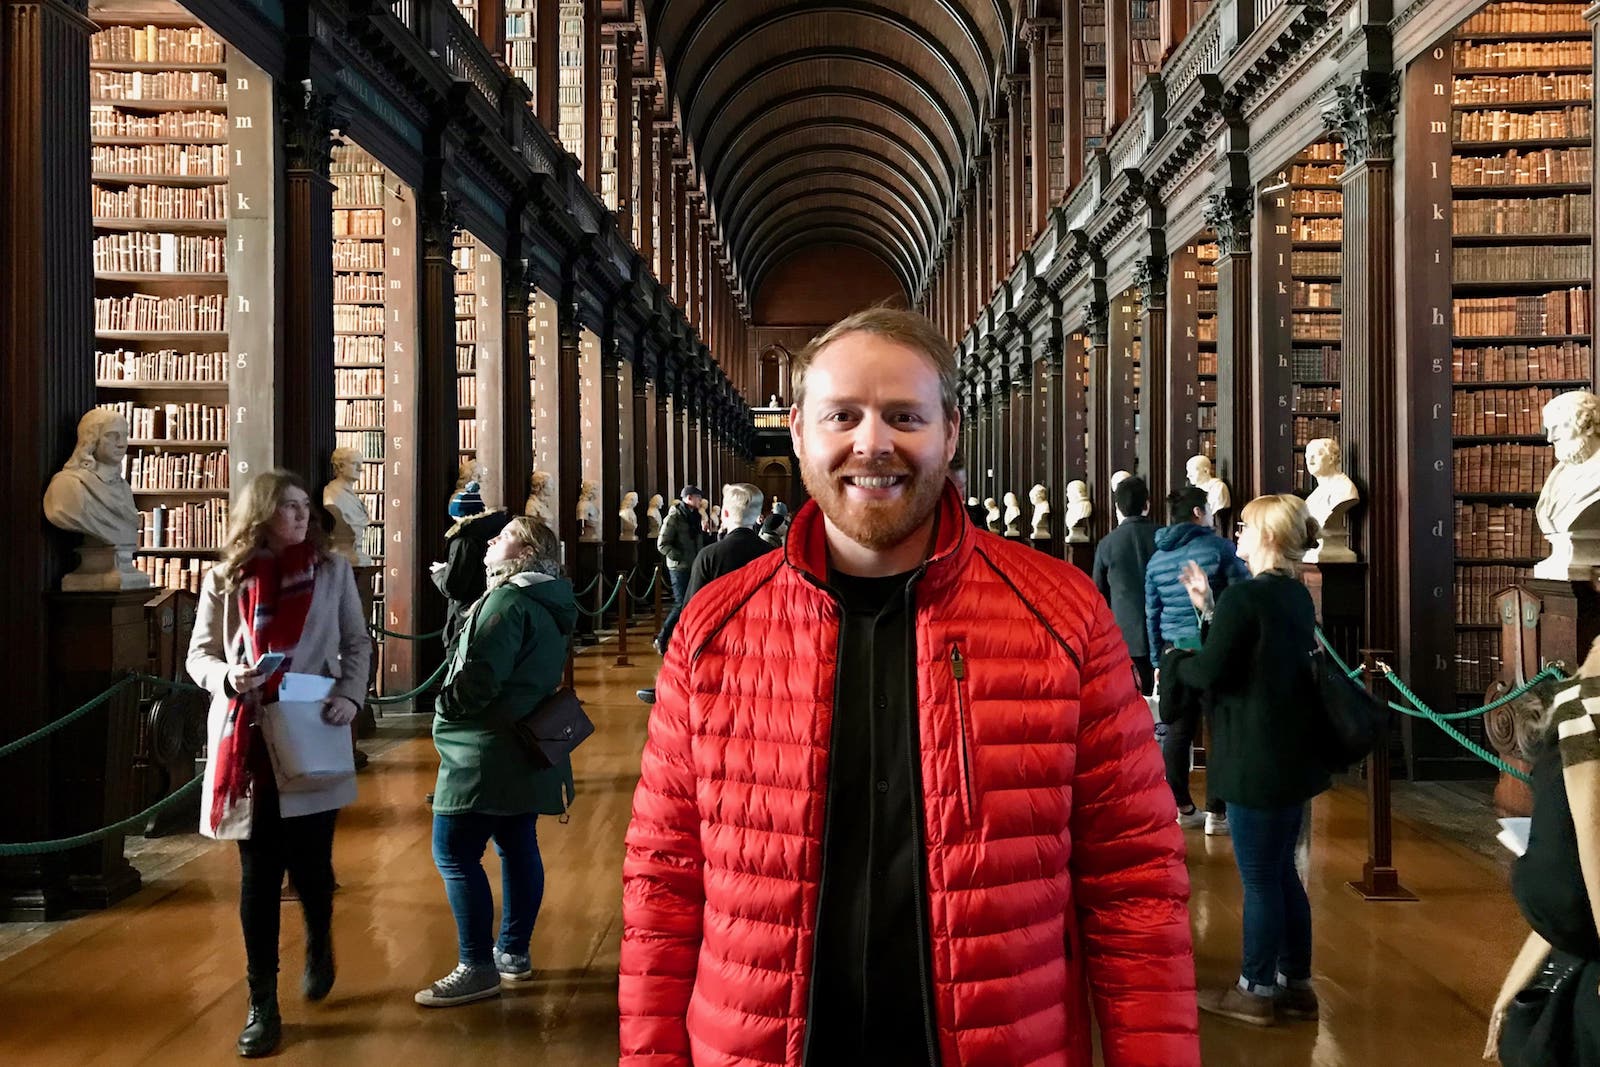 Judson stands in the great hall of the Book of Kells